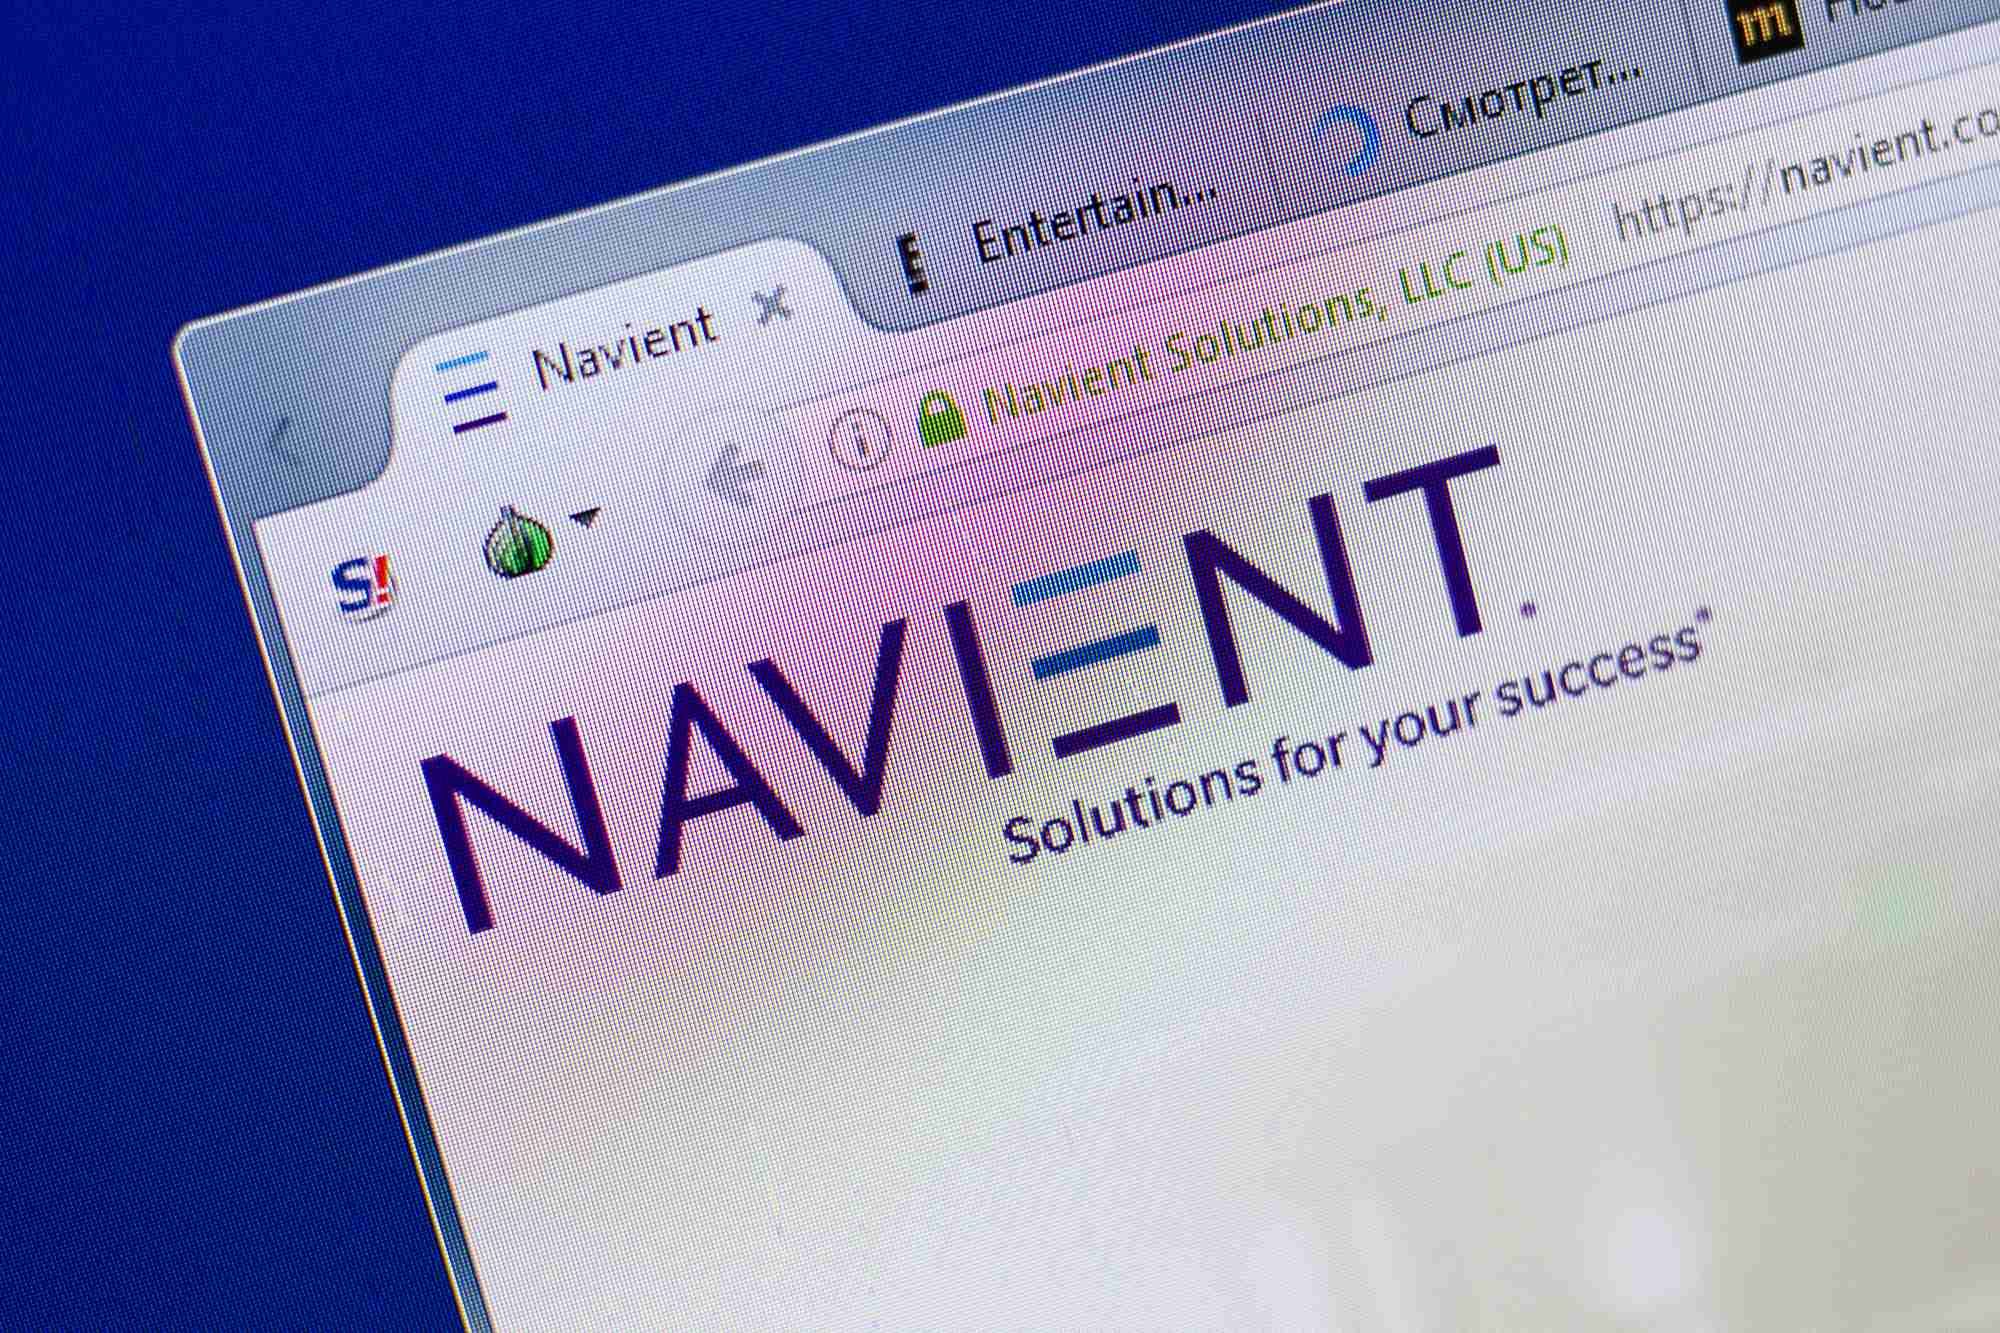 A Navient Solutions debt collection settlement has been reached to resolve claims that the loan servicer called consumers in a harassing manner.